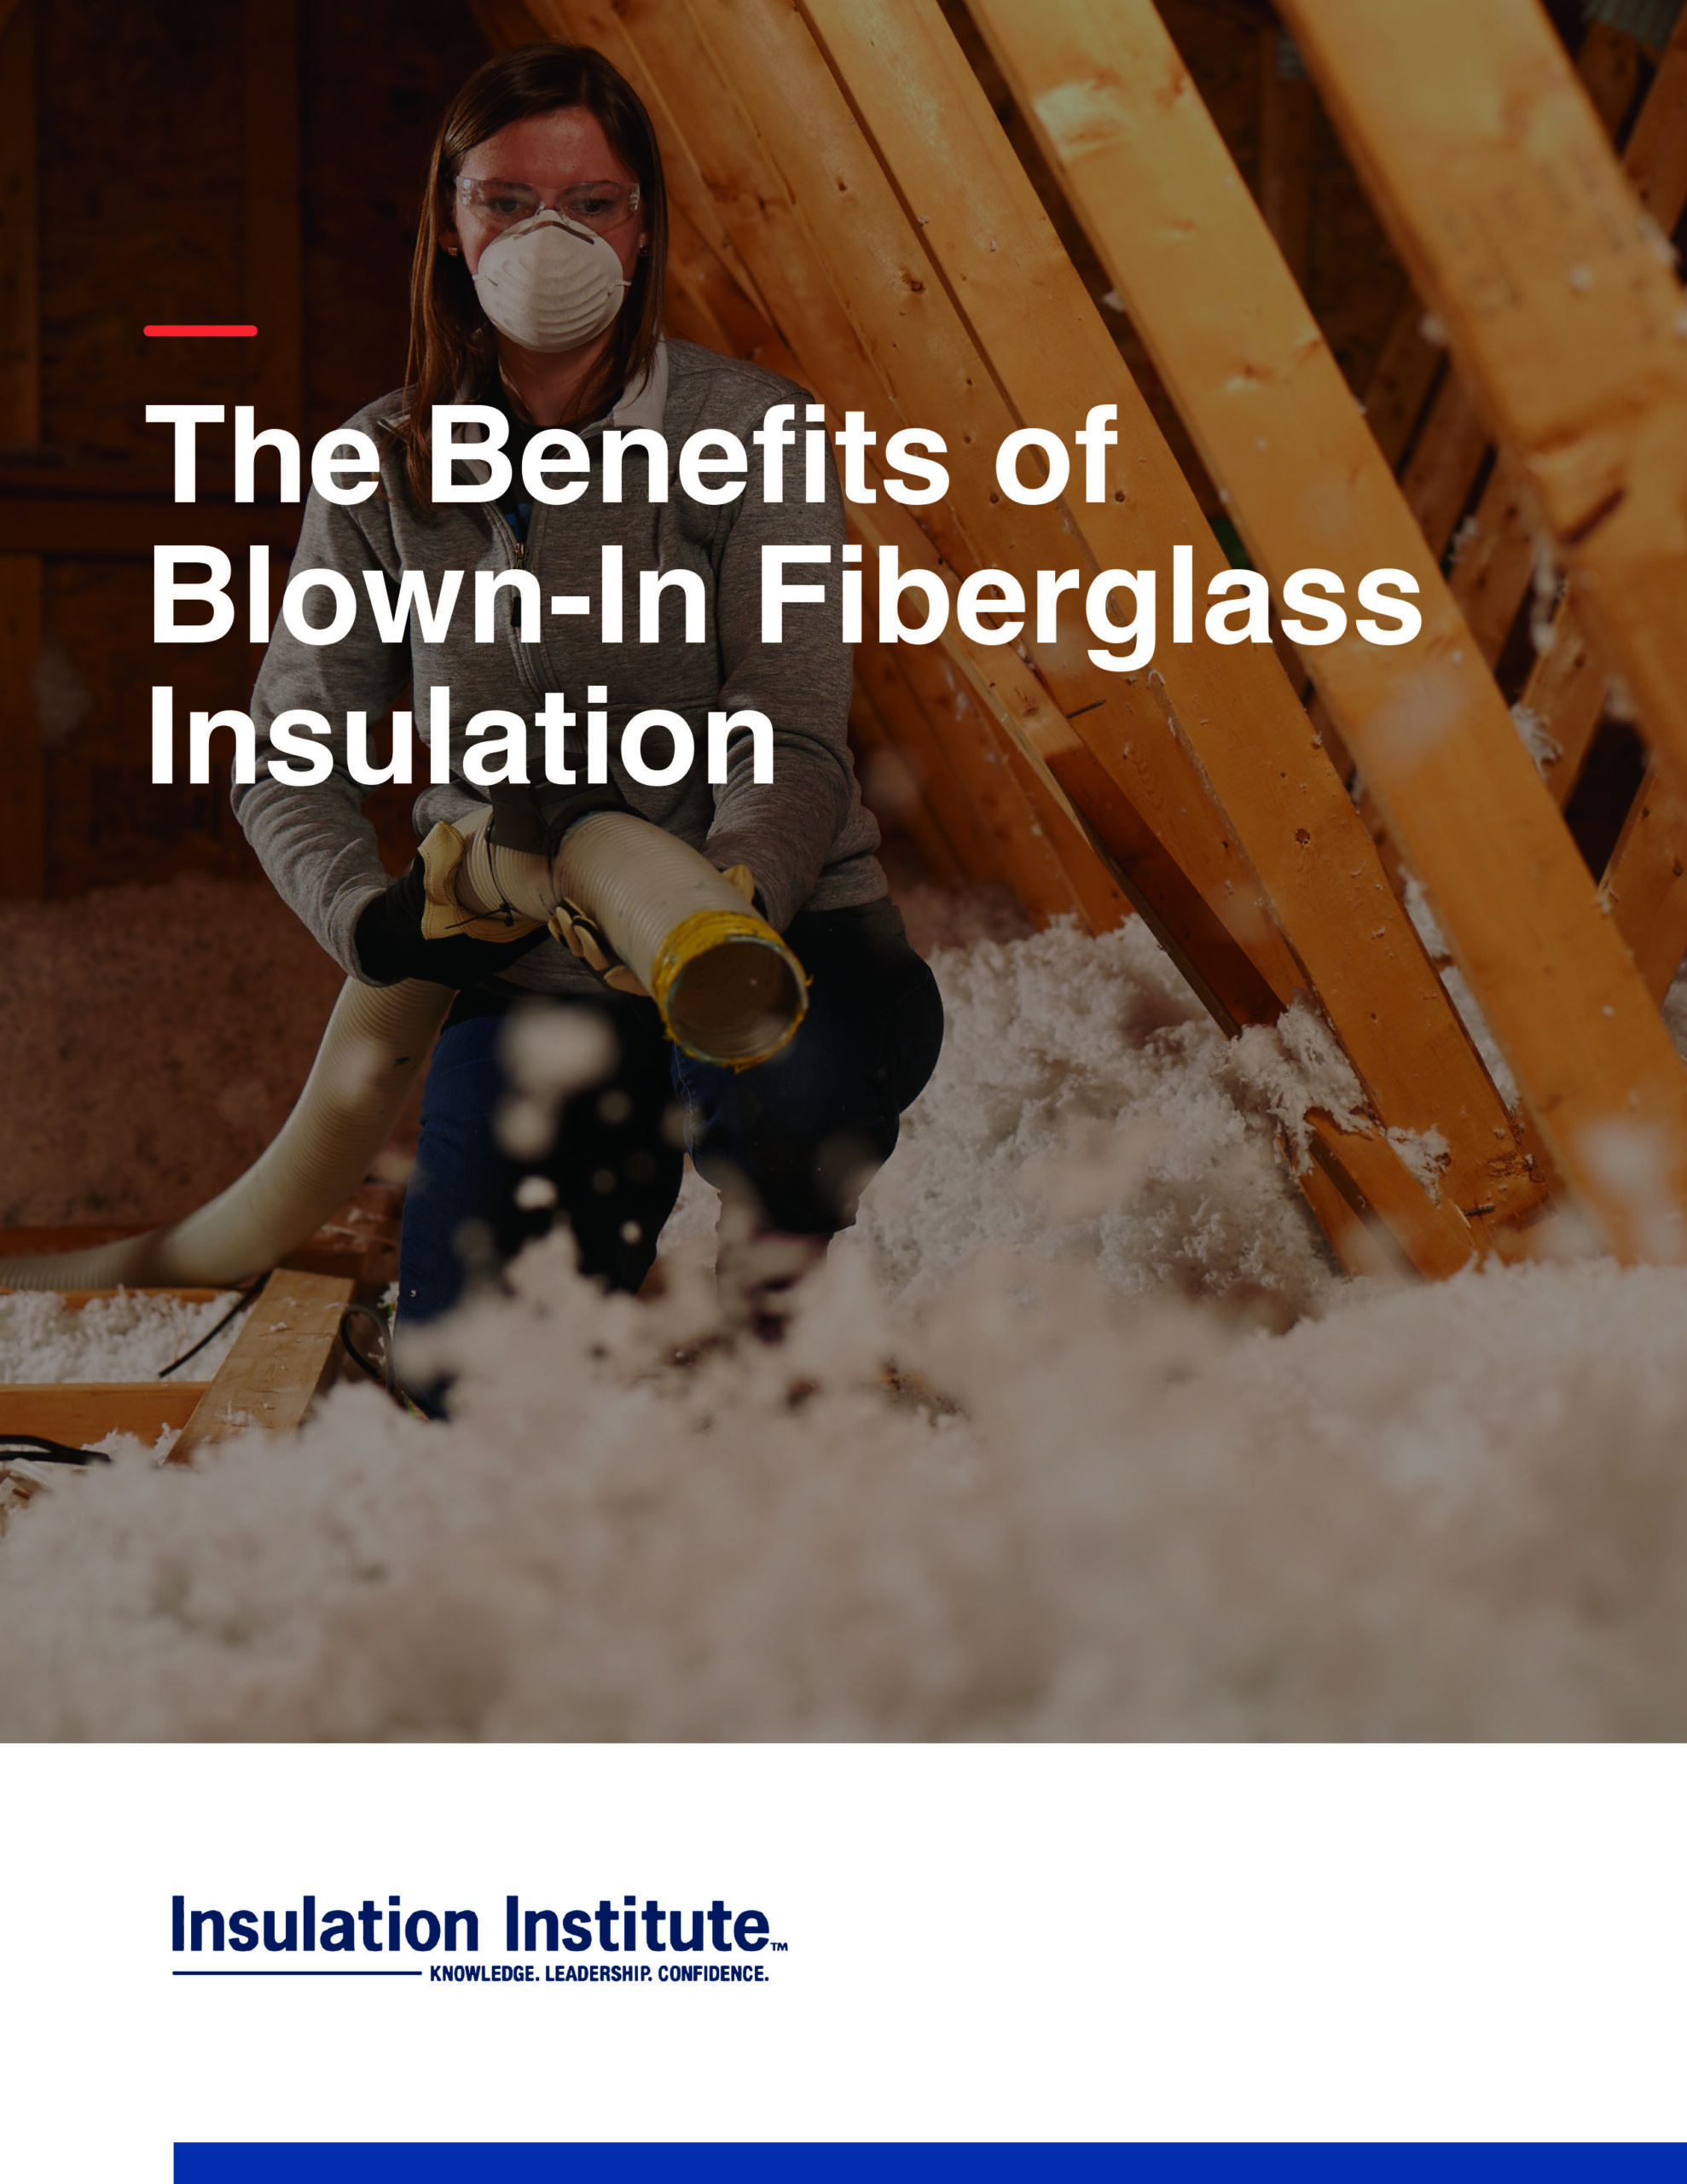 New Release: The Benefits of Blown-In Fiberglass Insulation